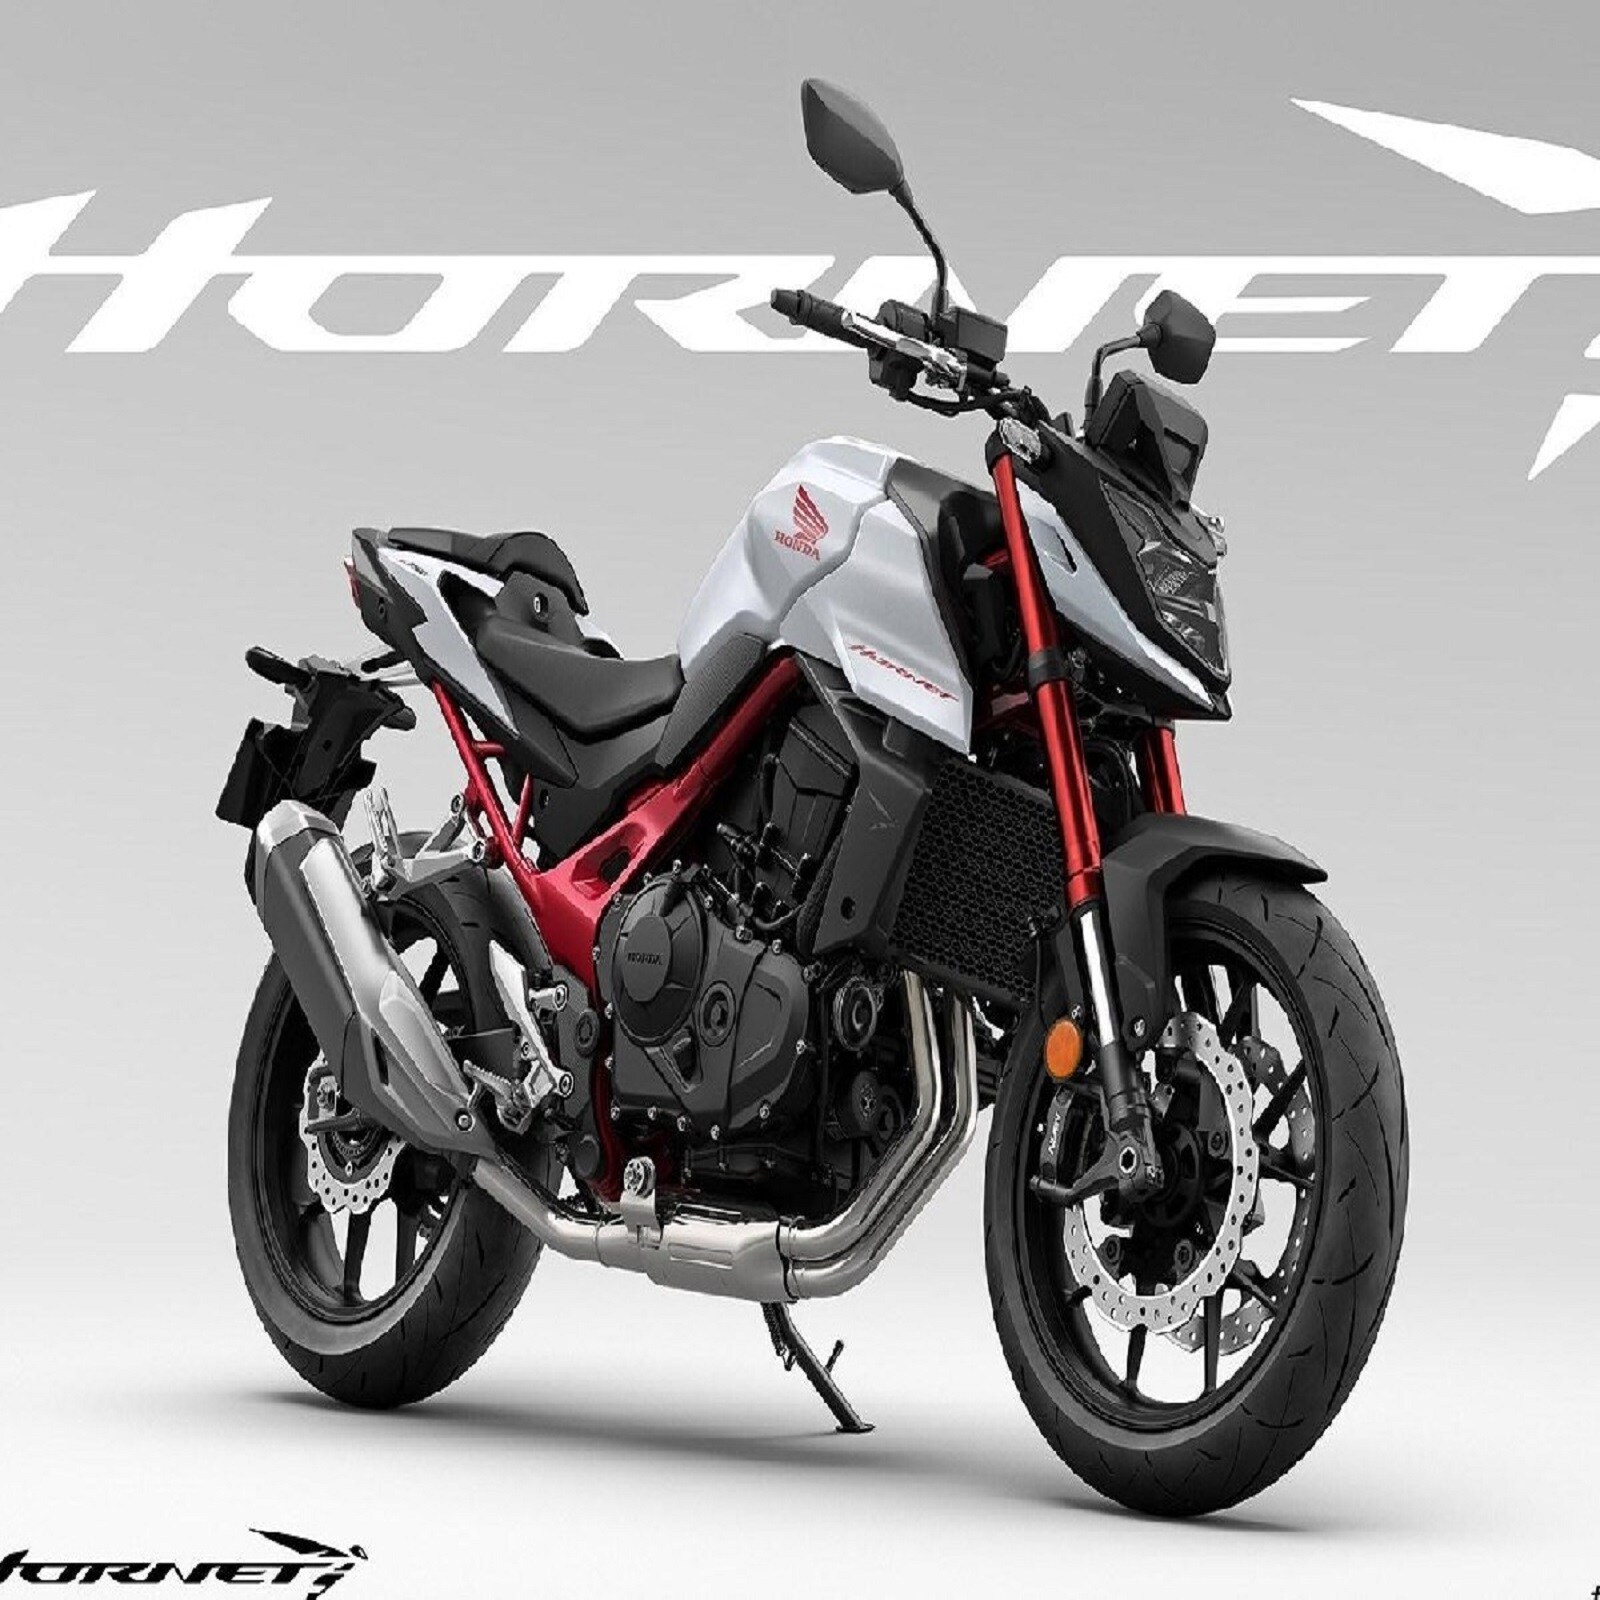 honda cb750 revealed know sports bikes features design and price